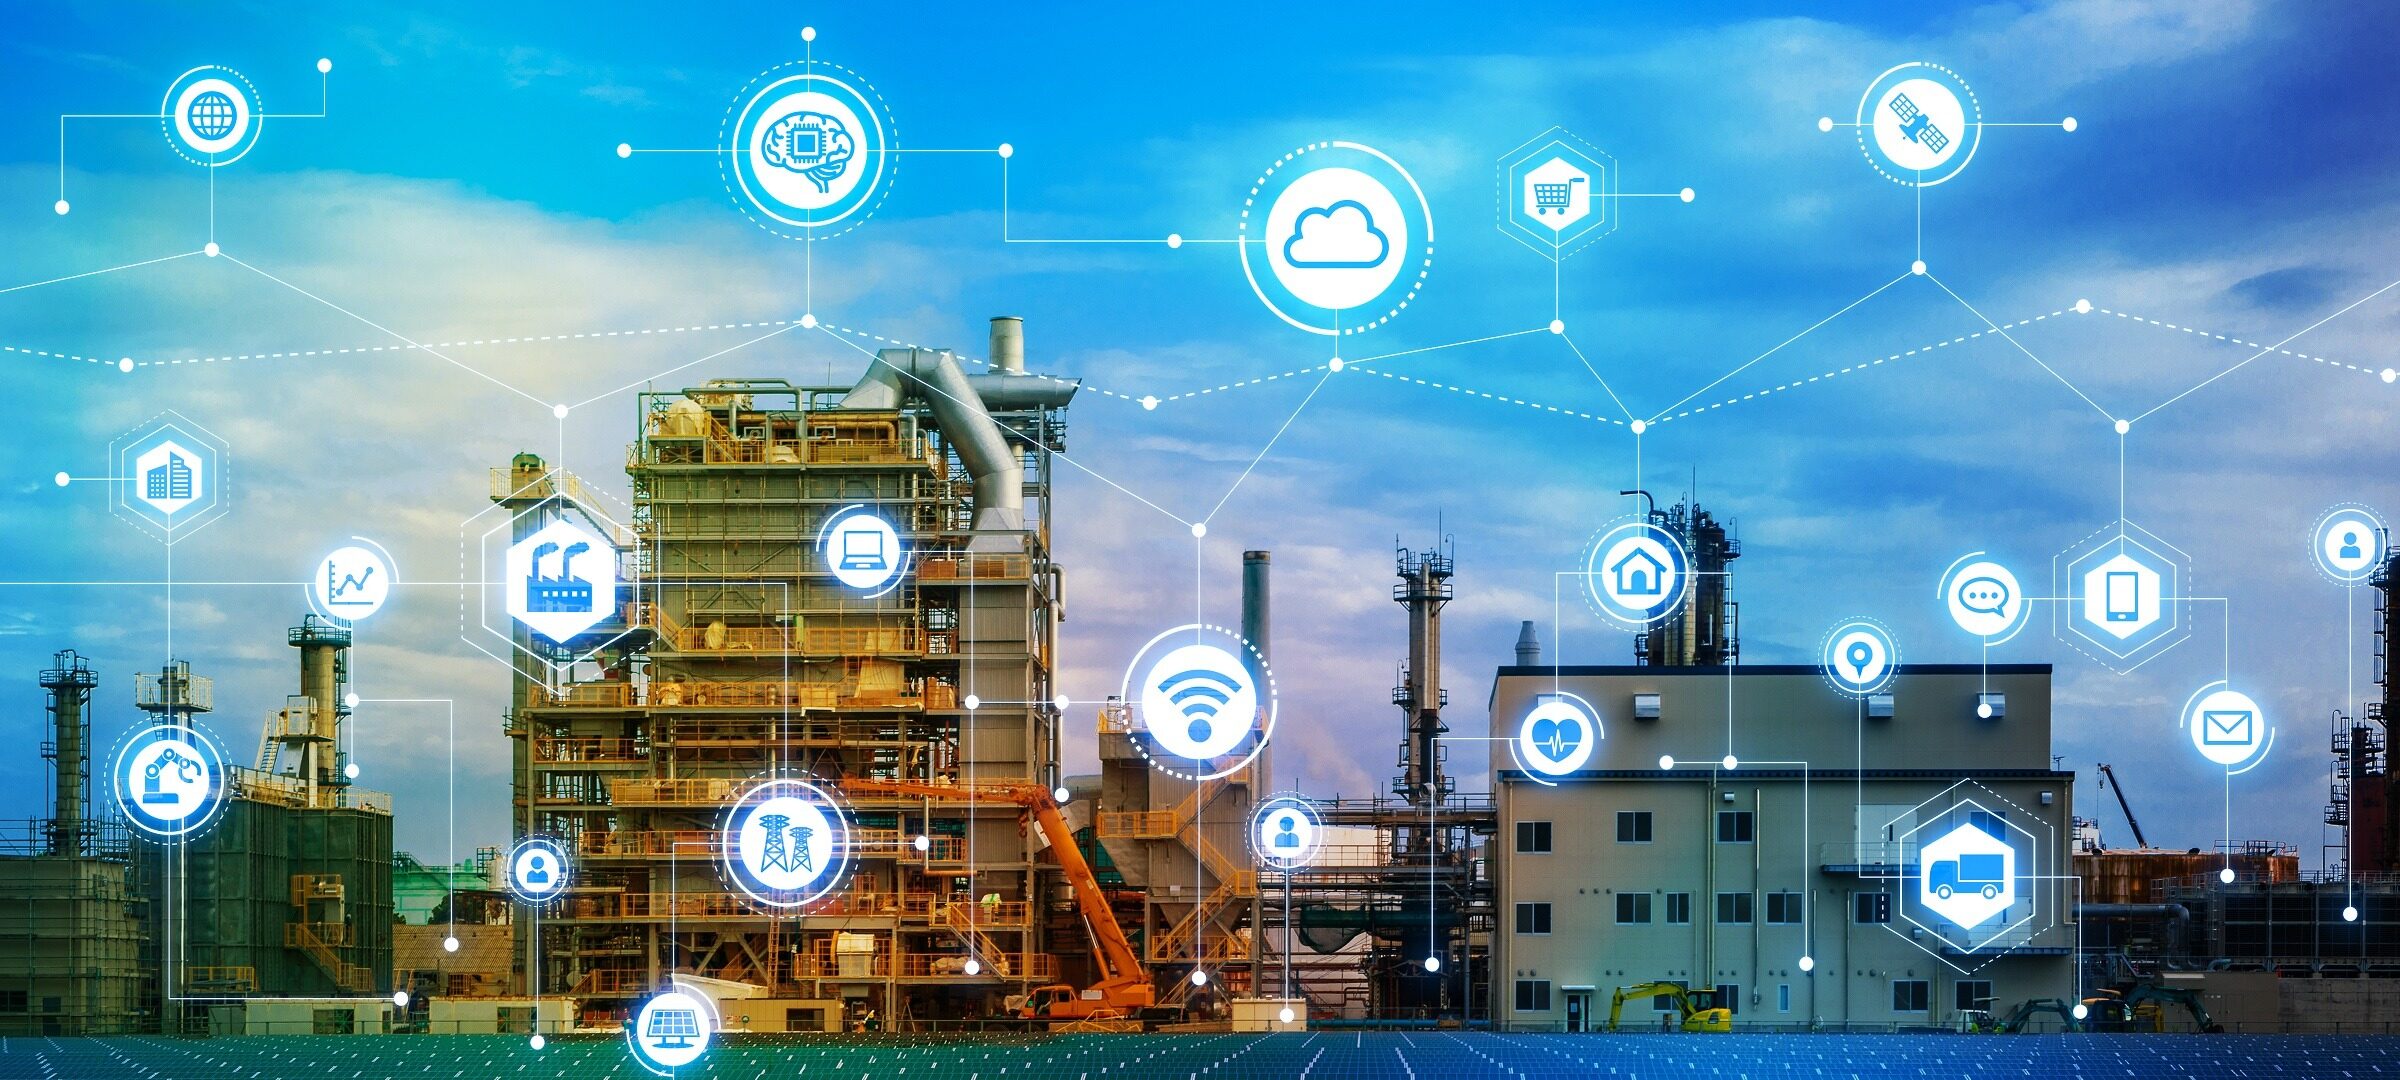 IoT Solutions for Industrial Security and Safety